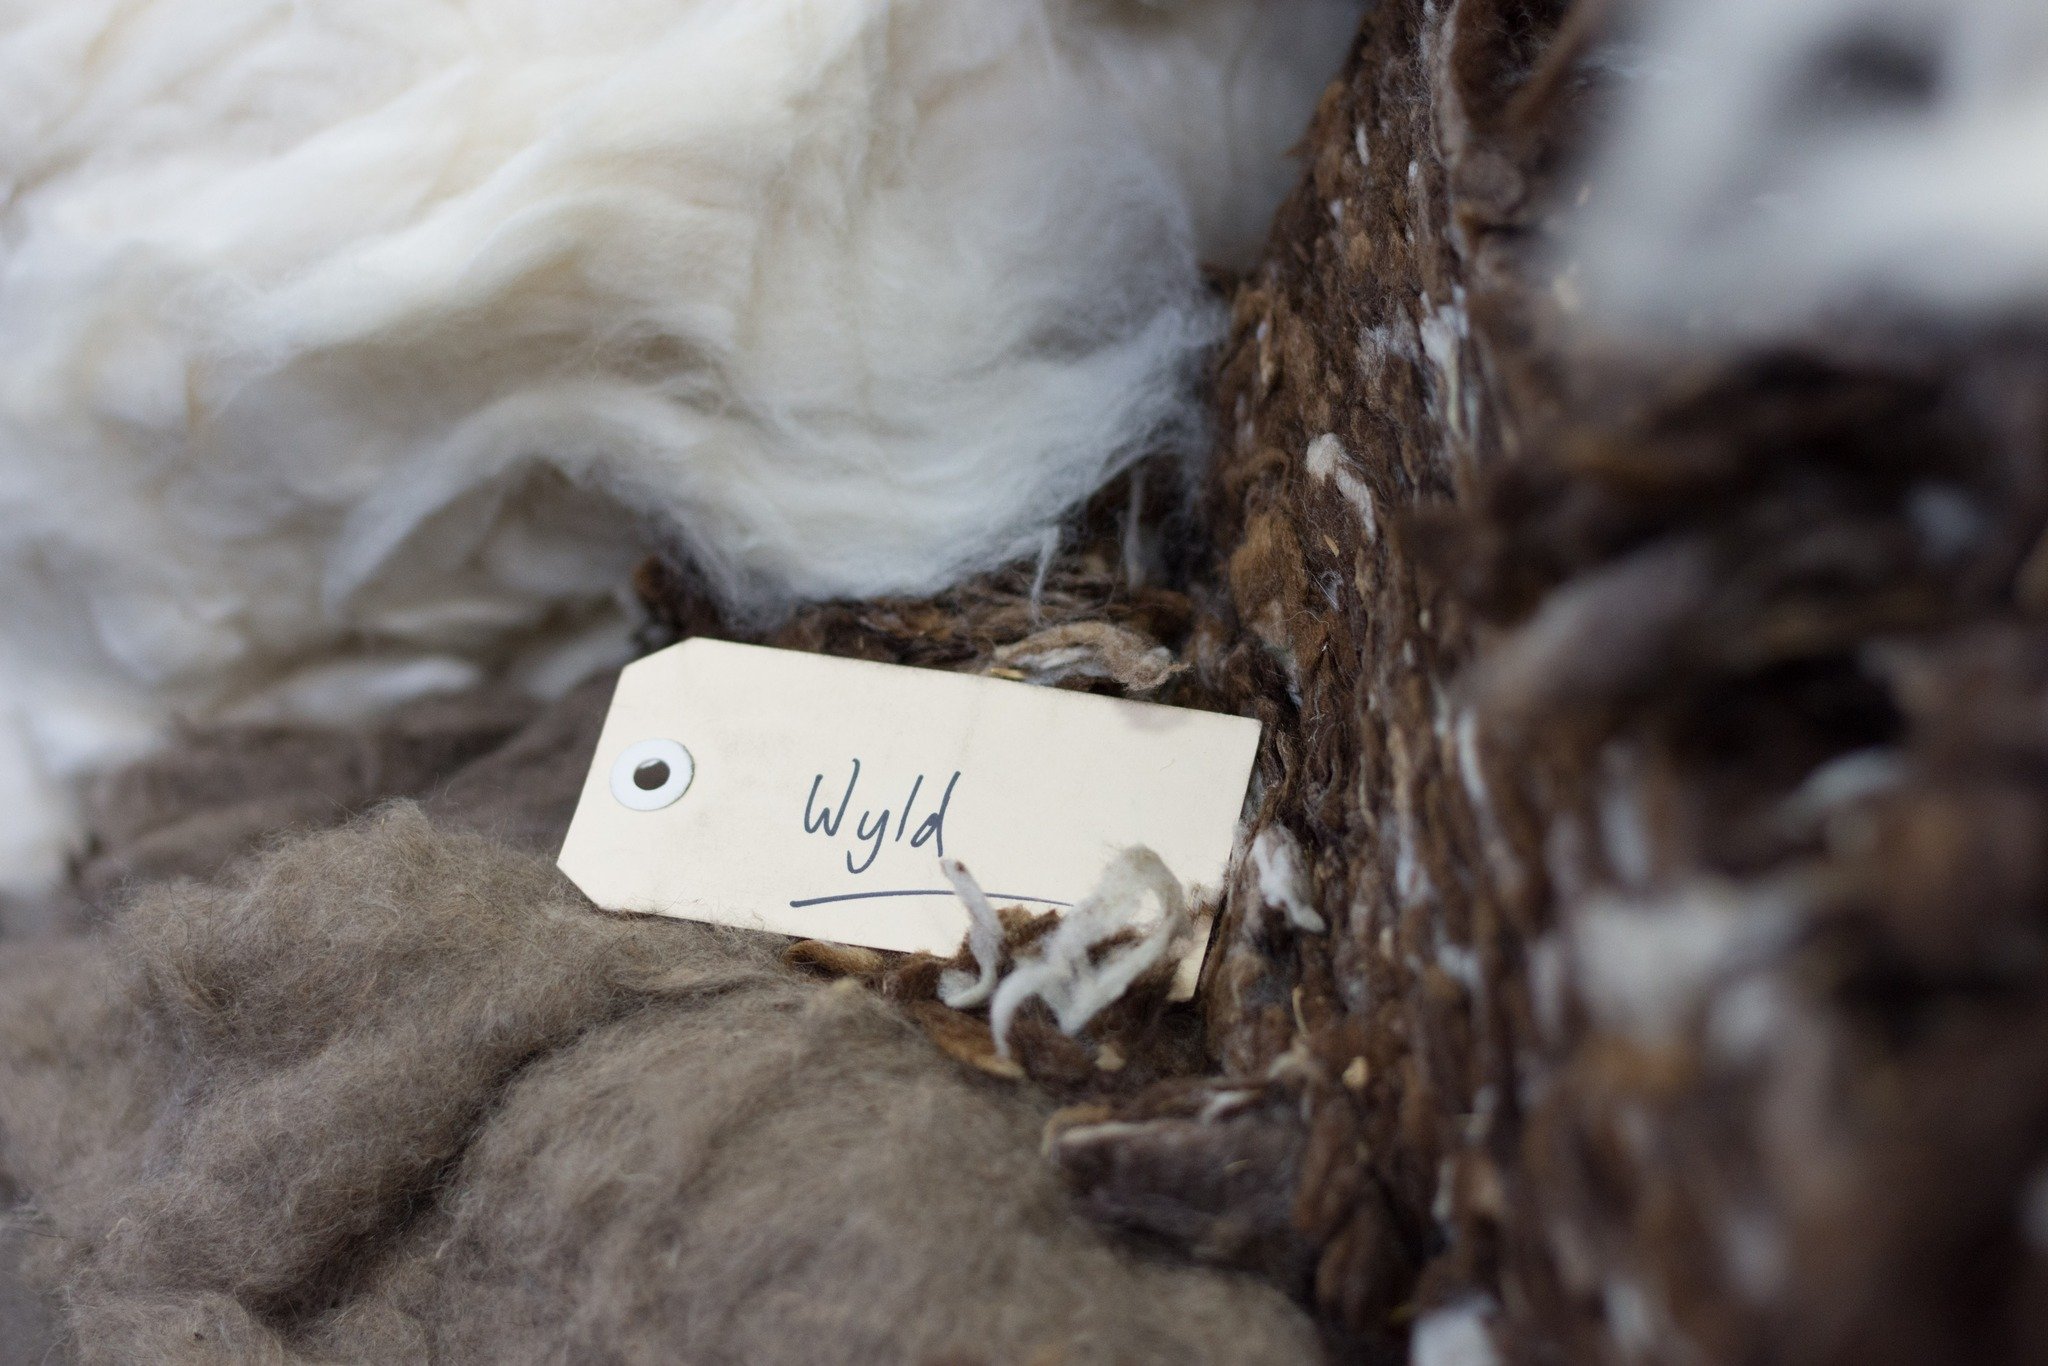 Our Pihepe yarn is not just wool. It is the unique combination of Pihepe (Pitt Island Wild Sheep), Merino, and Possum. 

Woolyarns in Wellington turn these 3 ingredients into the lightweight cosiness you know as Wyld.

The critical pieces to understa